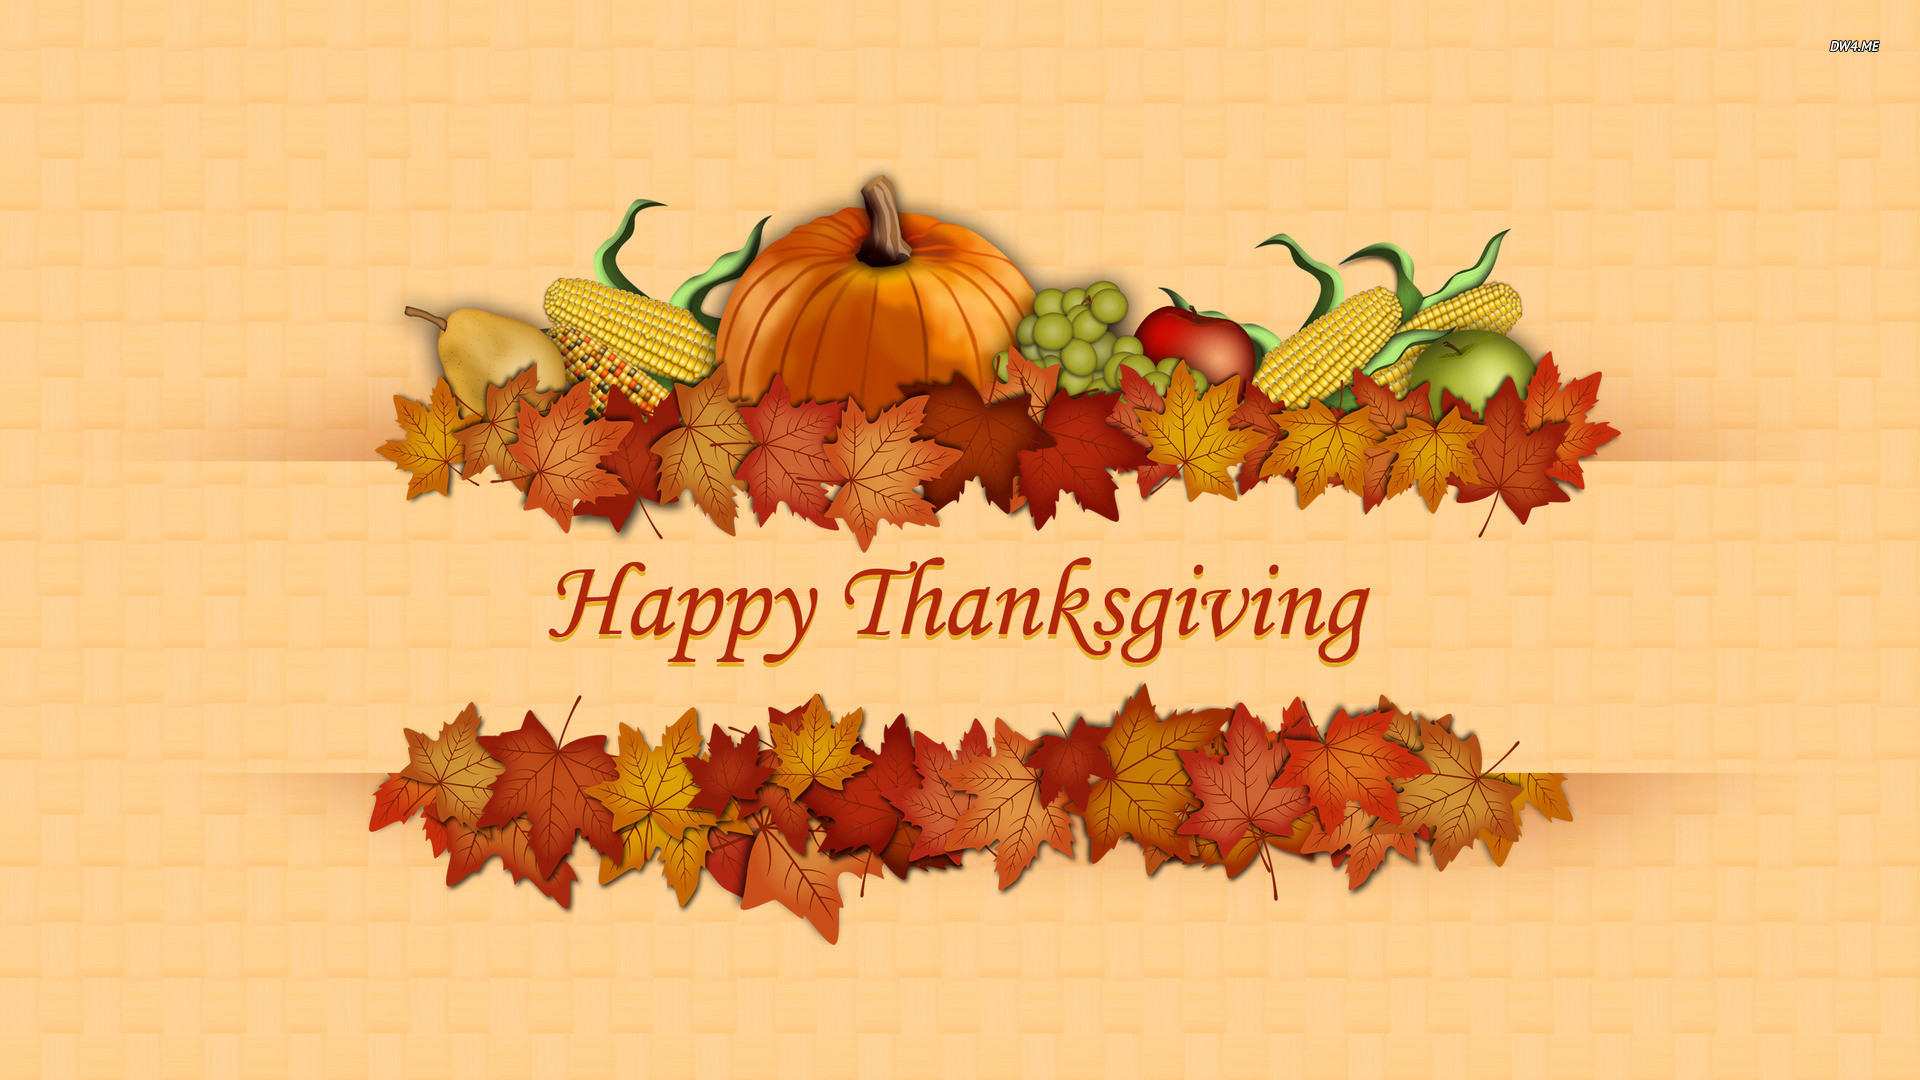 1920x1080 Search Results for “happy thanksgiving wallpaper for desktop” – Adorable  Wallpapers